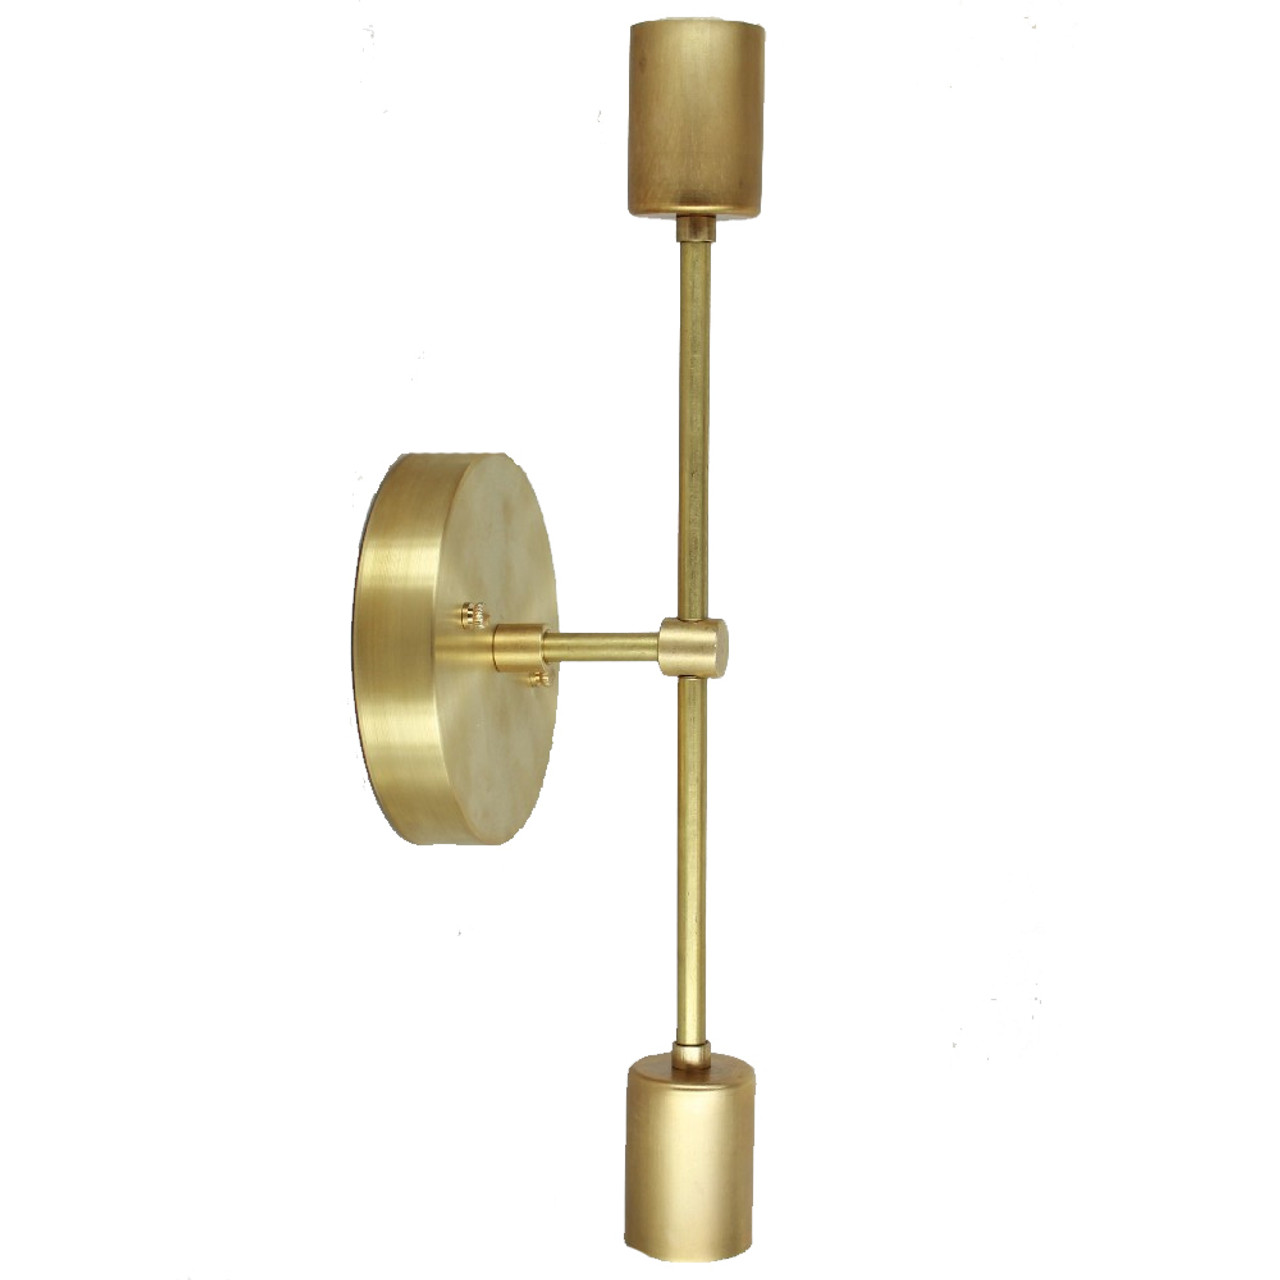 Details about   4 inch Chrome or Brass Fitter w Pull Chain Ceiling Sconce Fixture Base Flush 